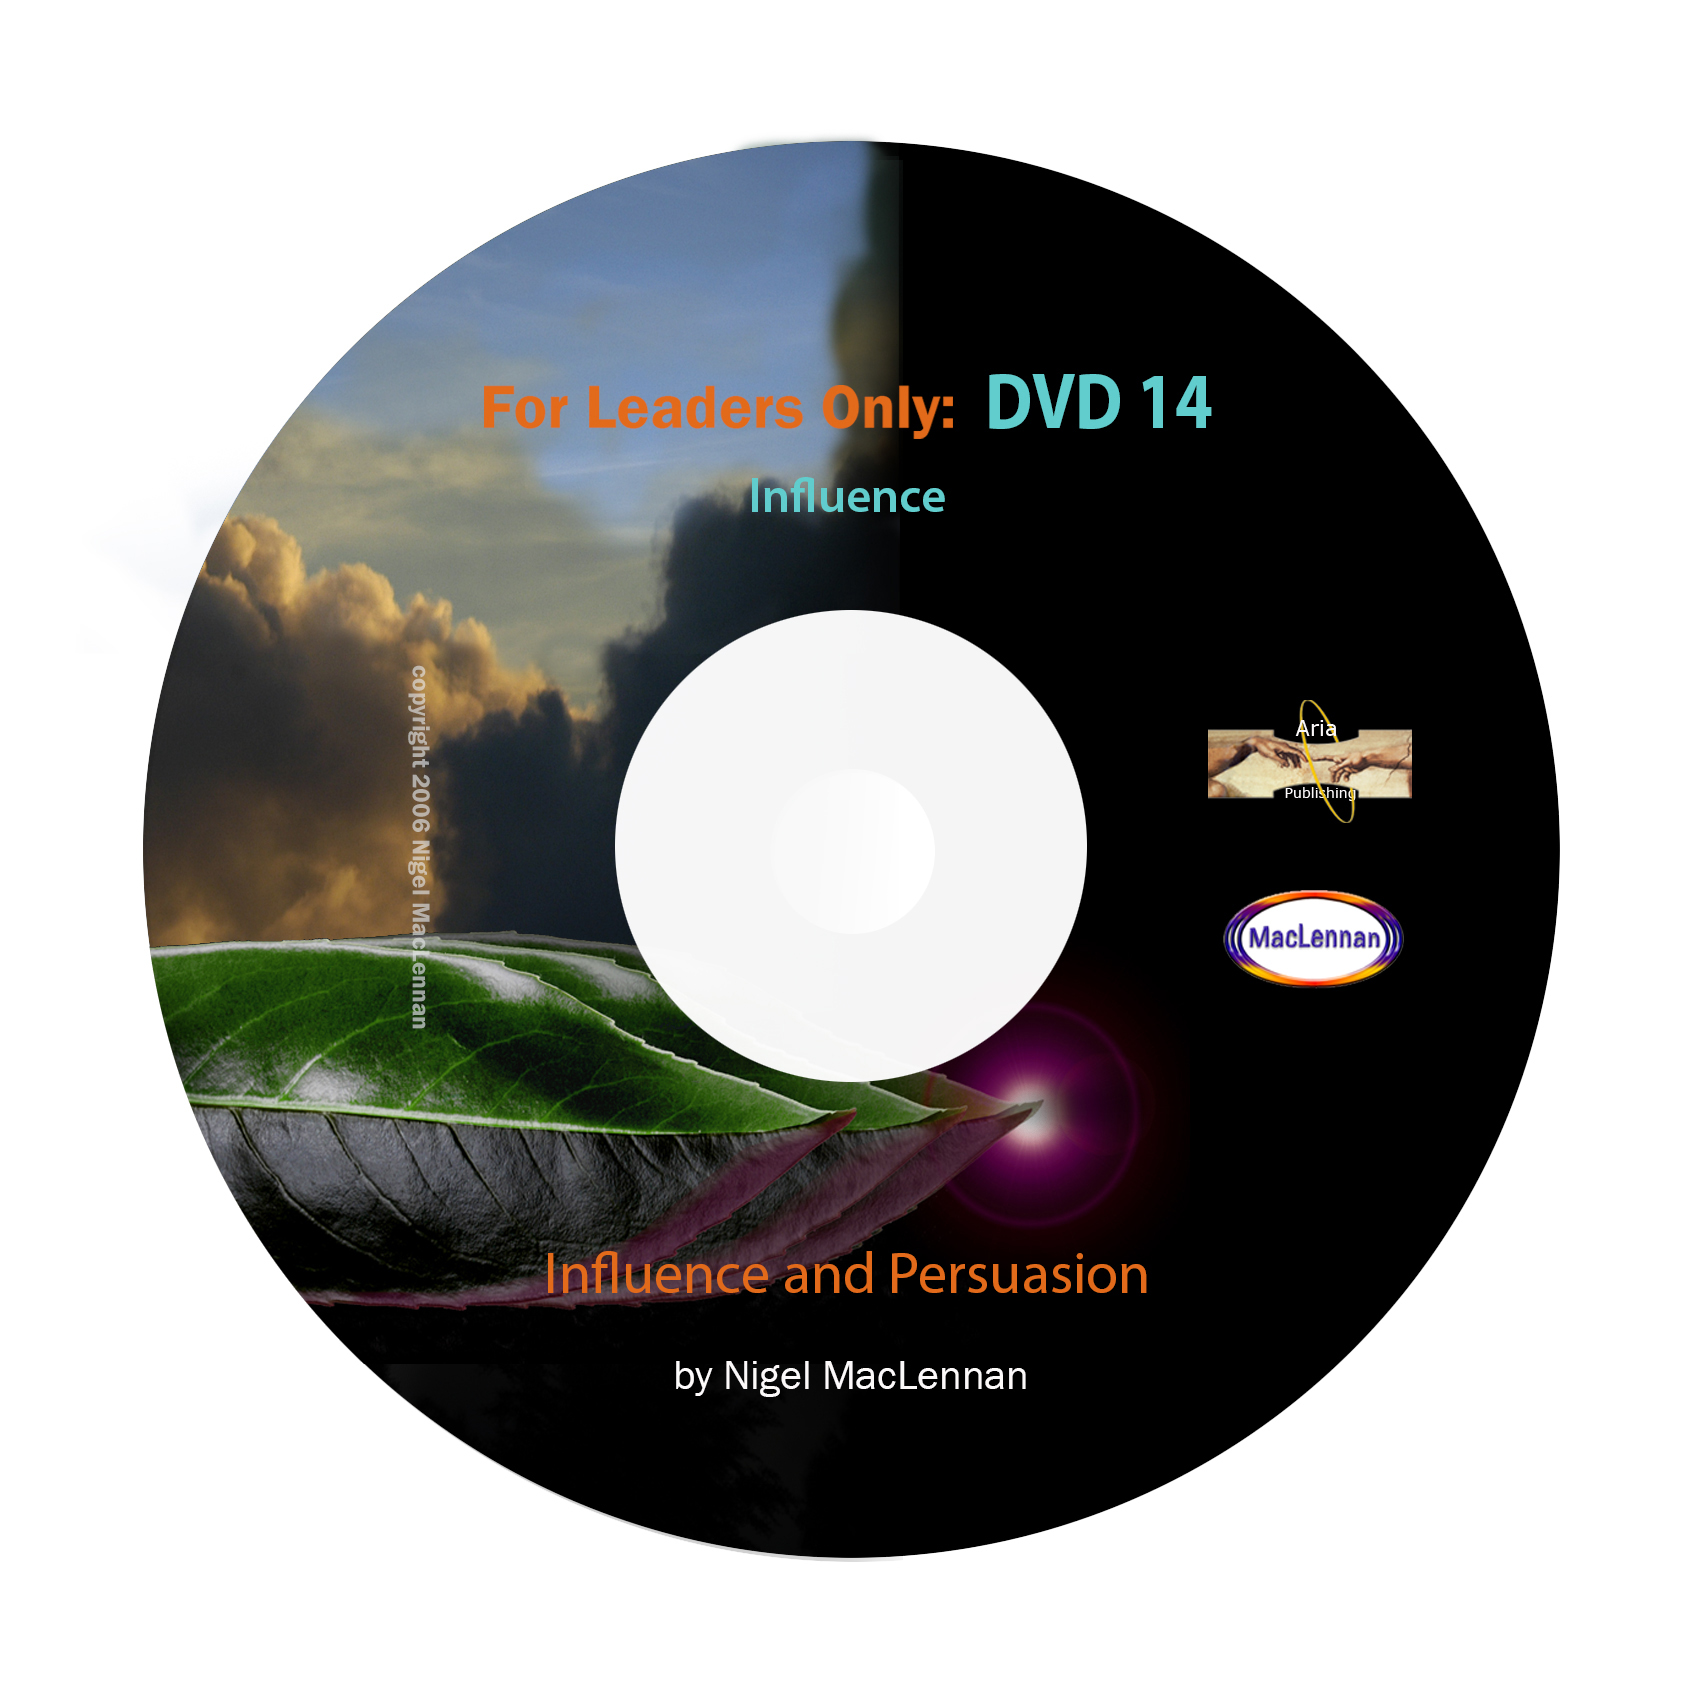 For Leaders Only - Influence and Persuasion DVD